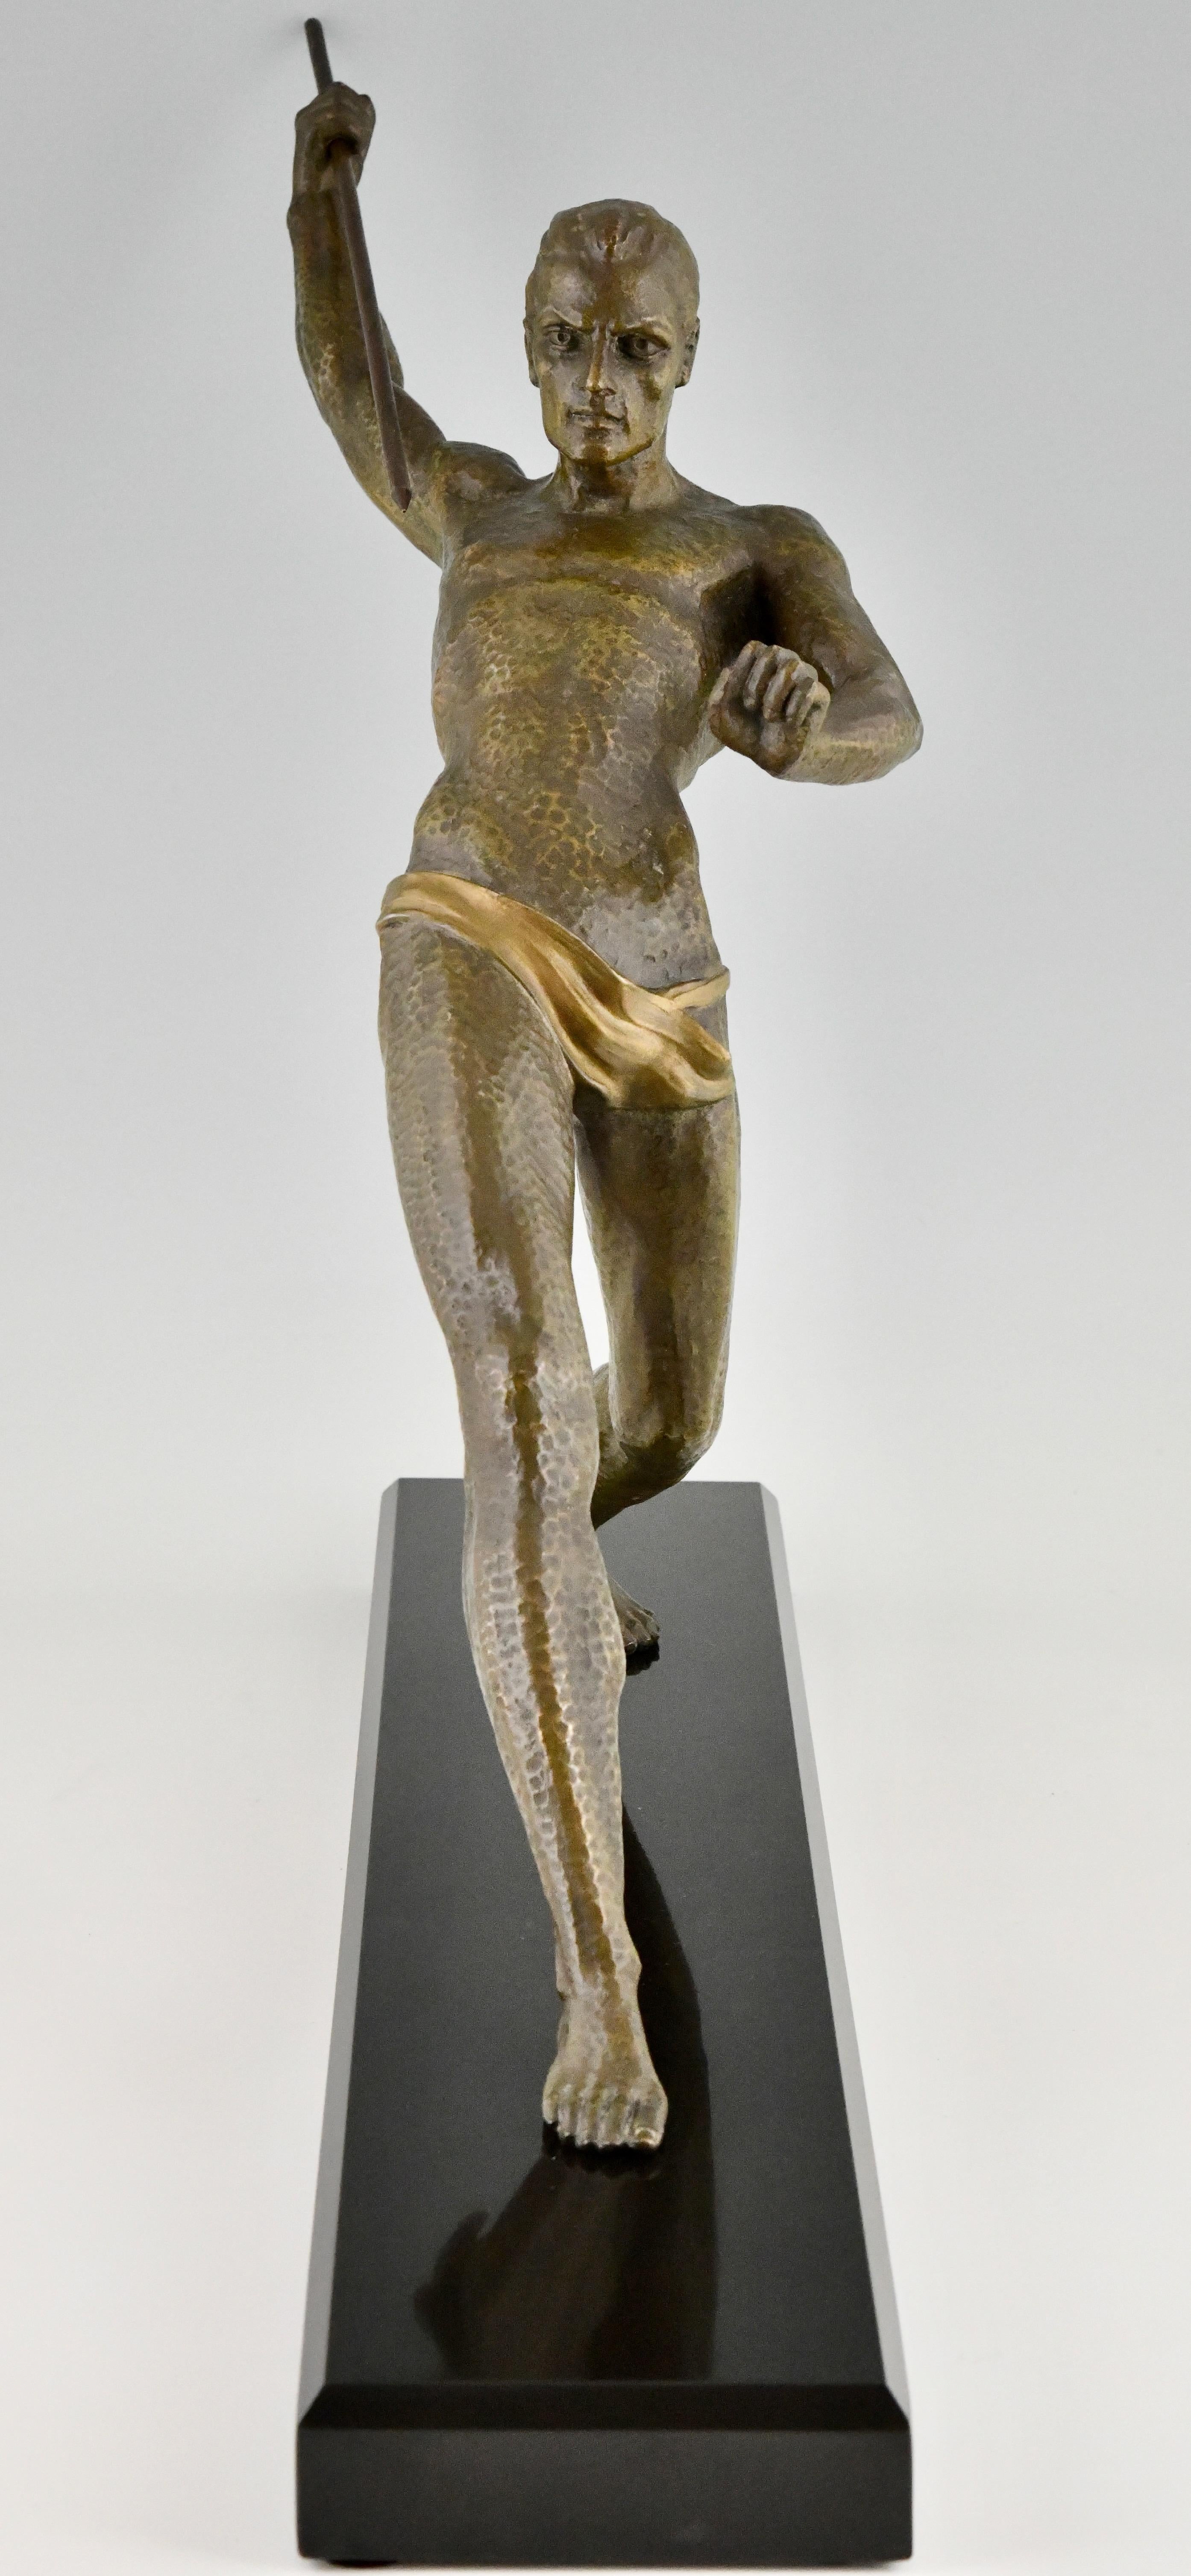 French Art Deco sculpture athlete with spear javelin thrower signed by Limousin, 1930. For Sale